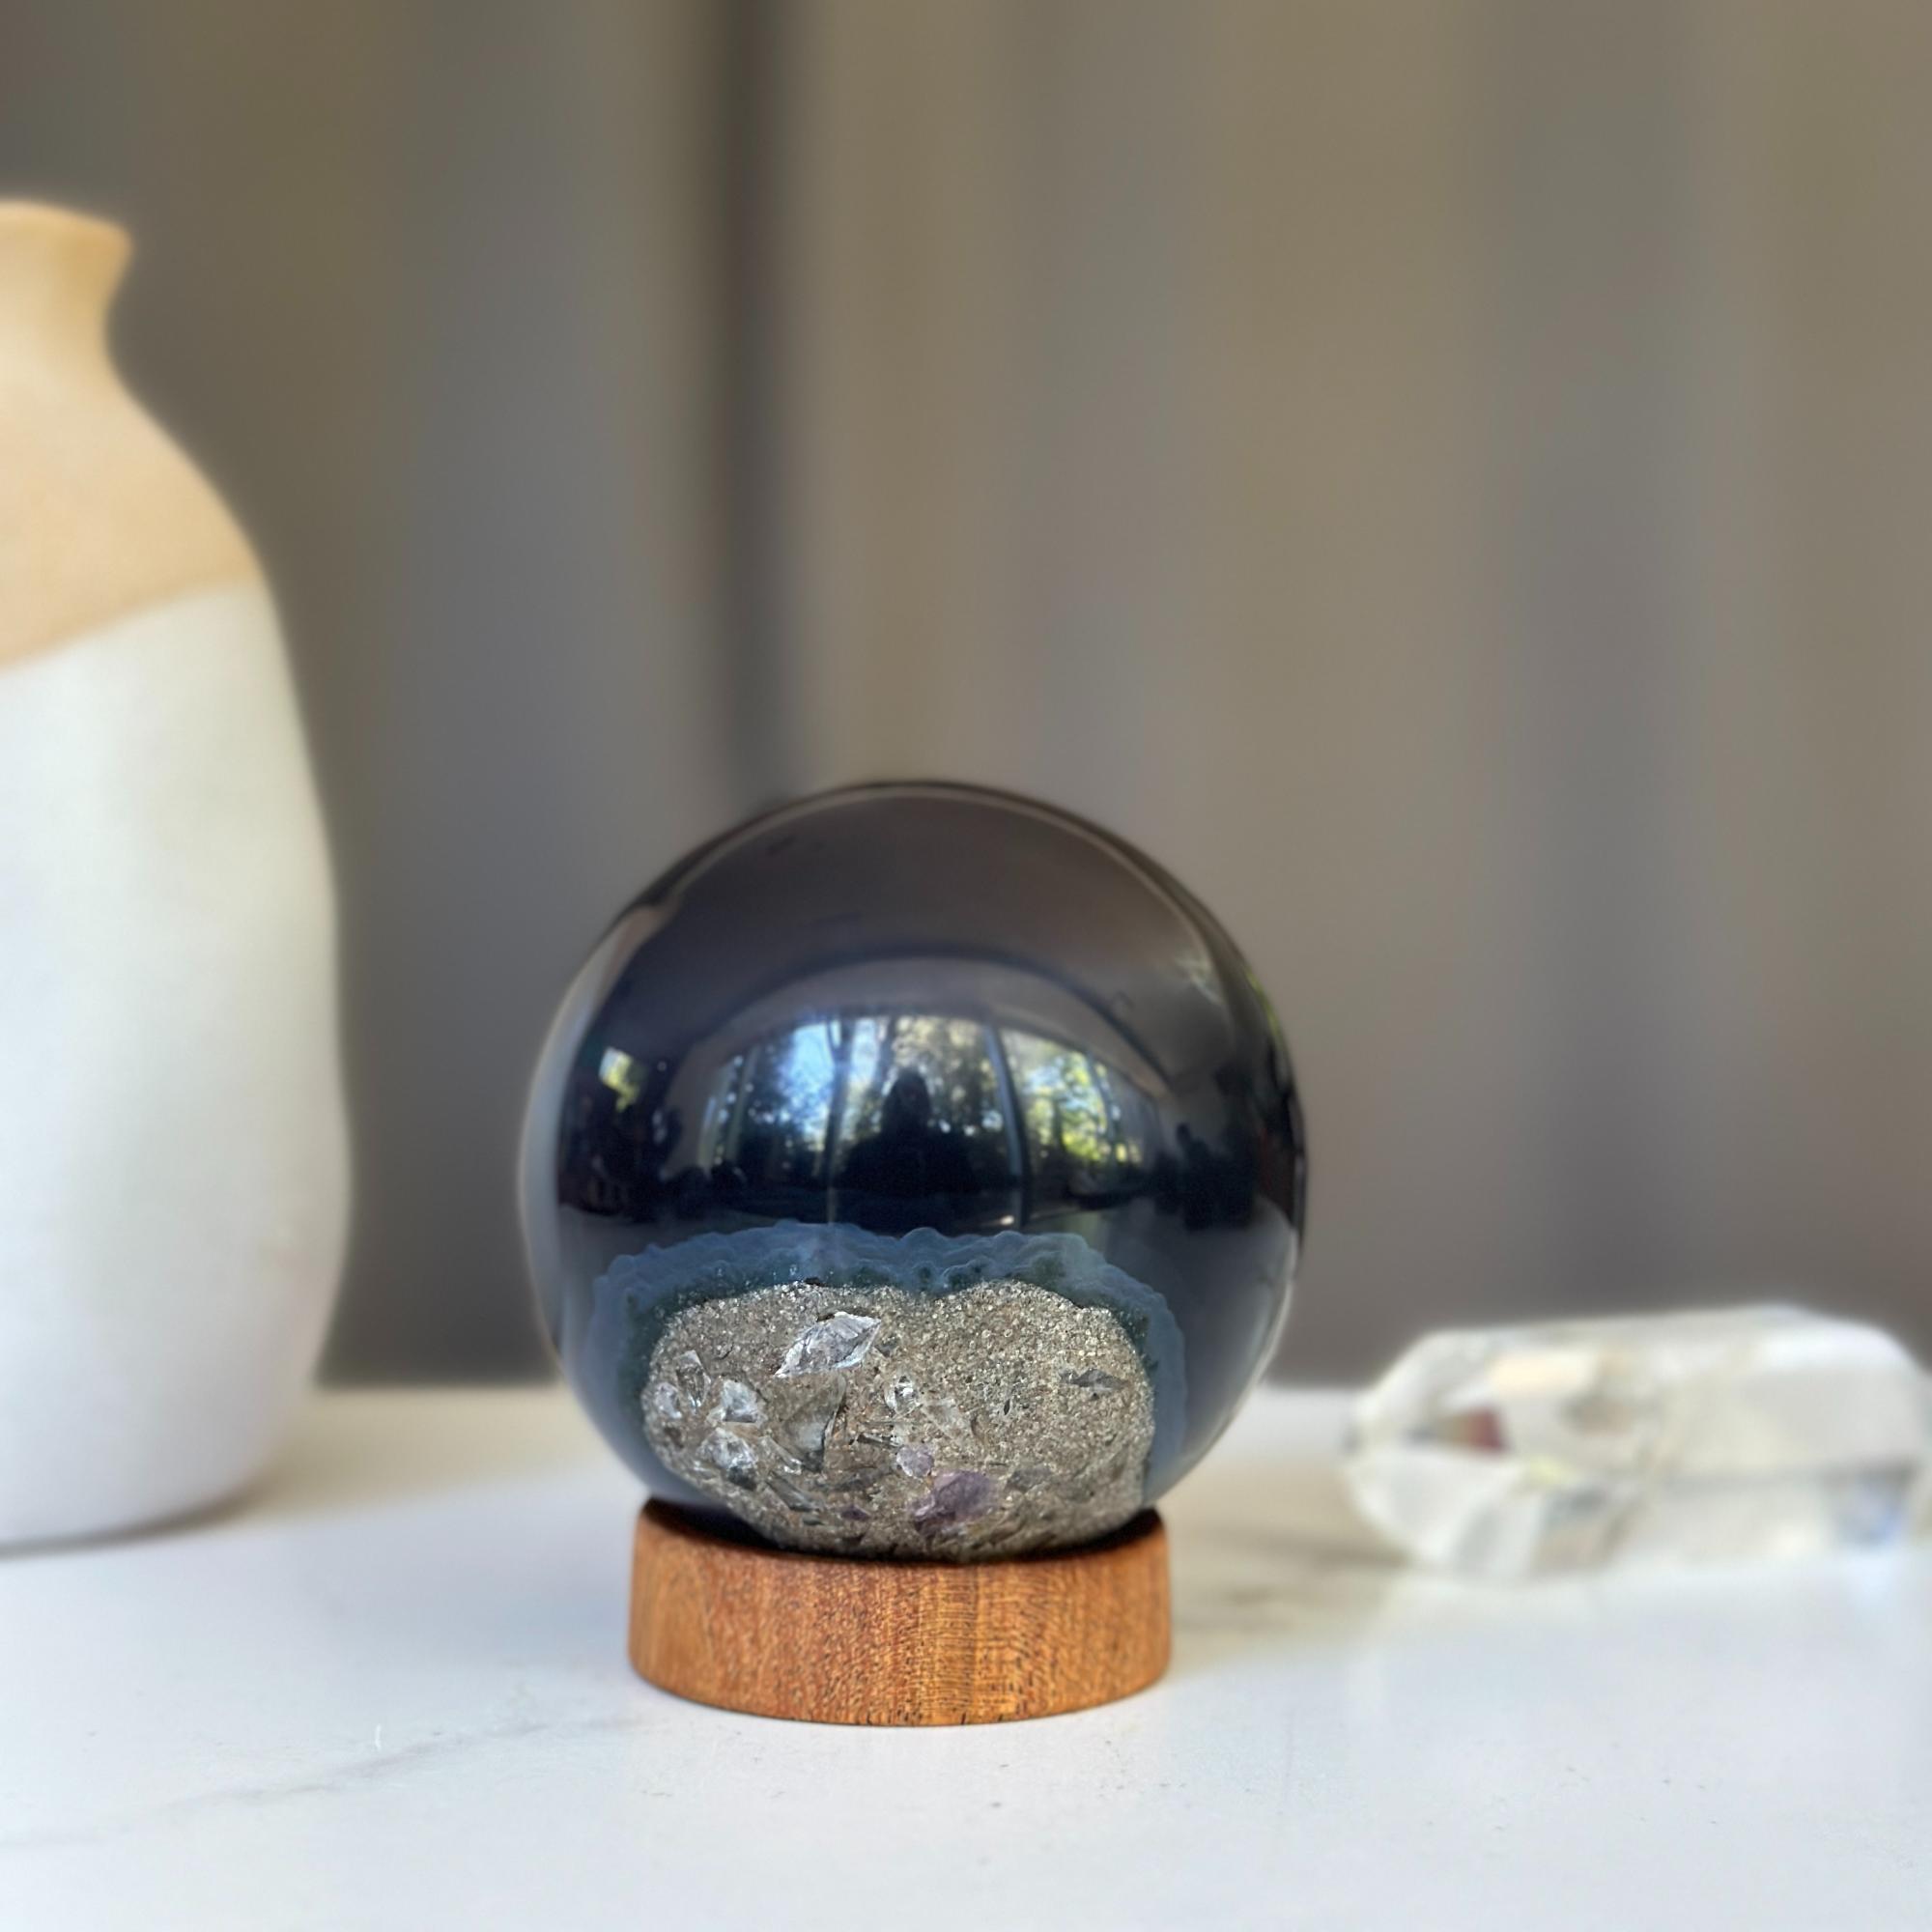 Black Agate Sphere with wood base included